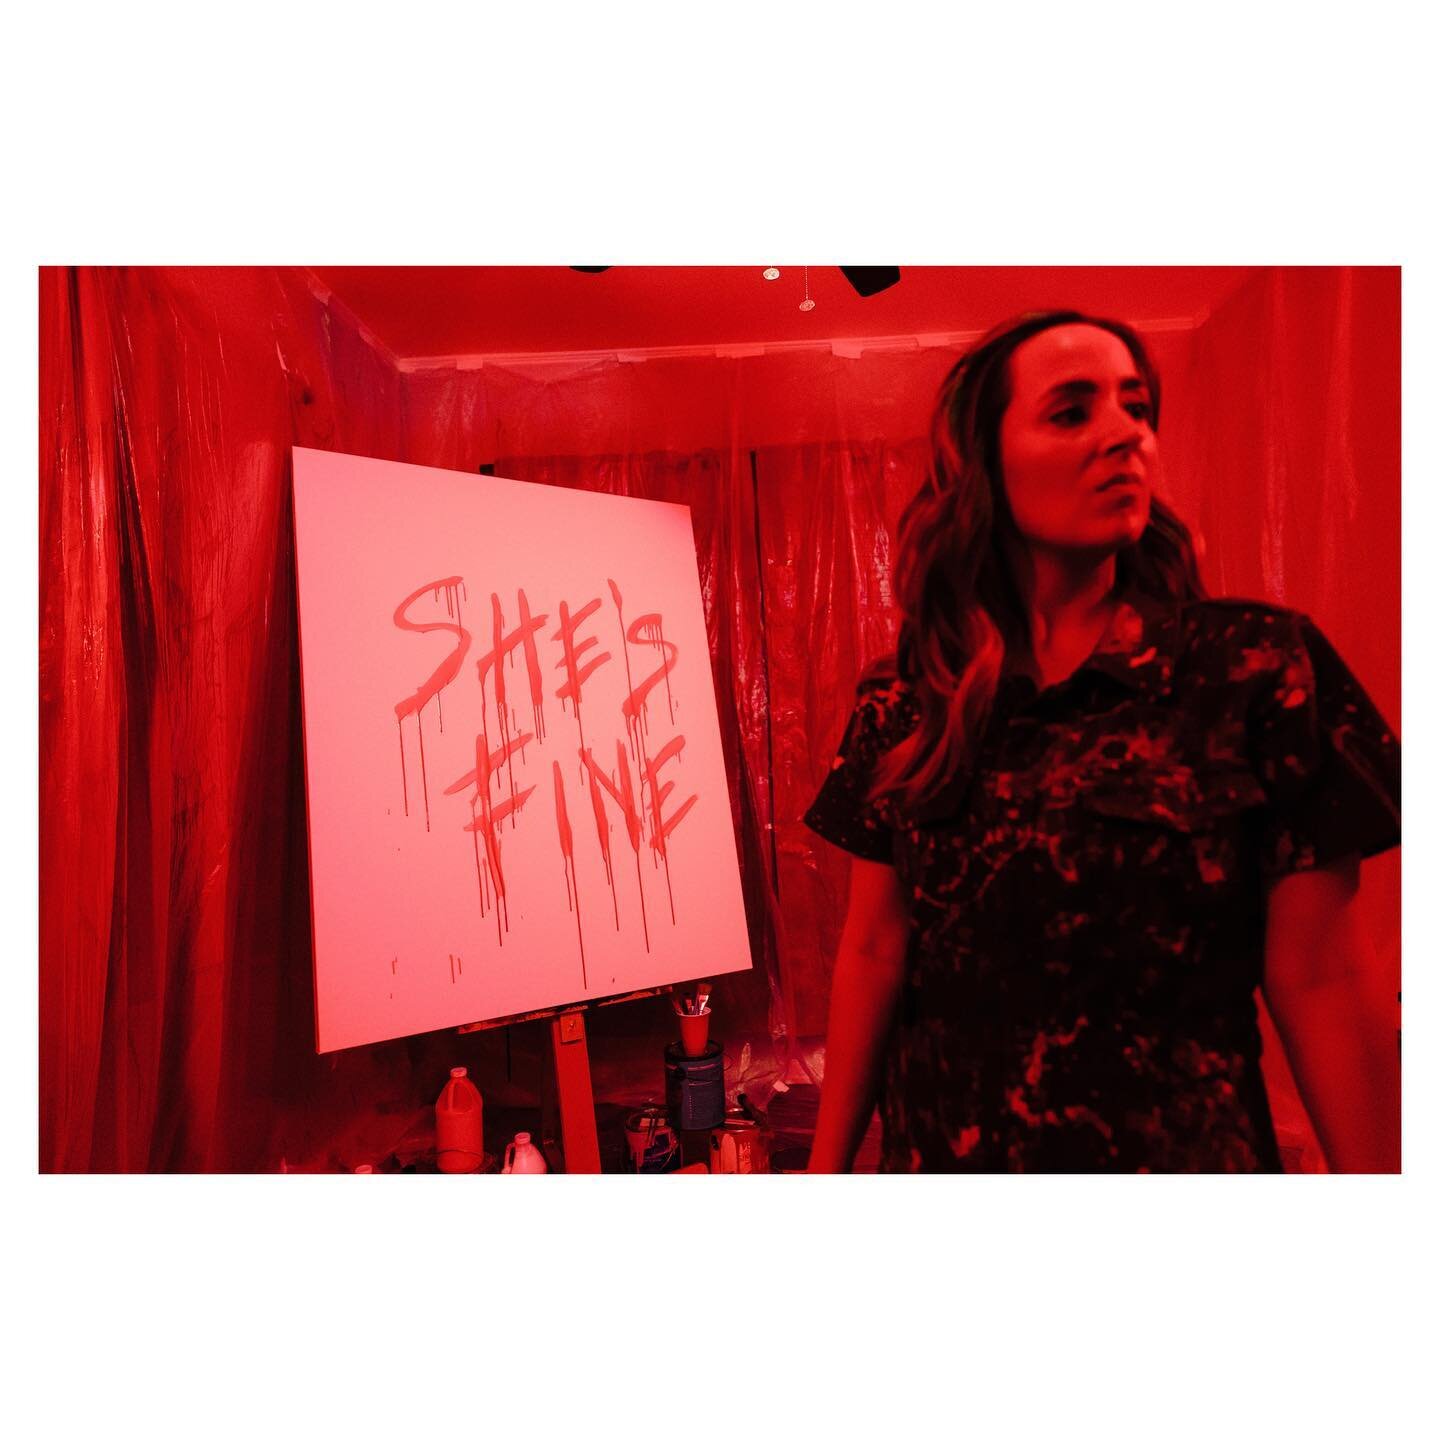 Shout out to the amazing @g_truj for taking BTS and key art photos on set of @shesfinefilm. He stepped in last minute and saved the day. I love being able to look back on the crazy fun times I had directing with this hard working cast and crew.

#bts